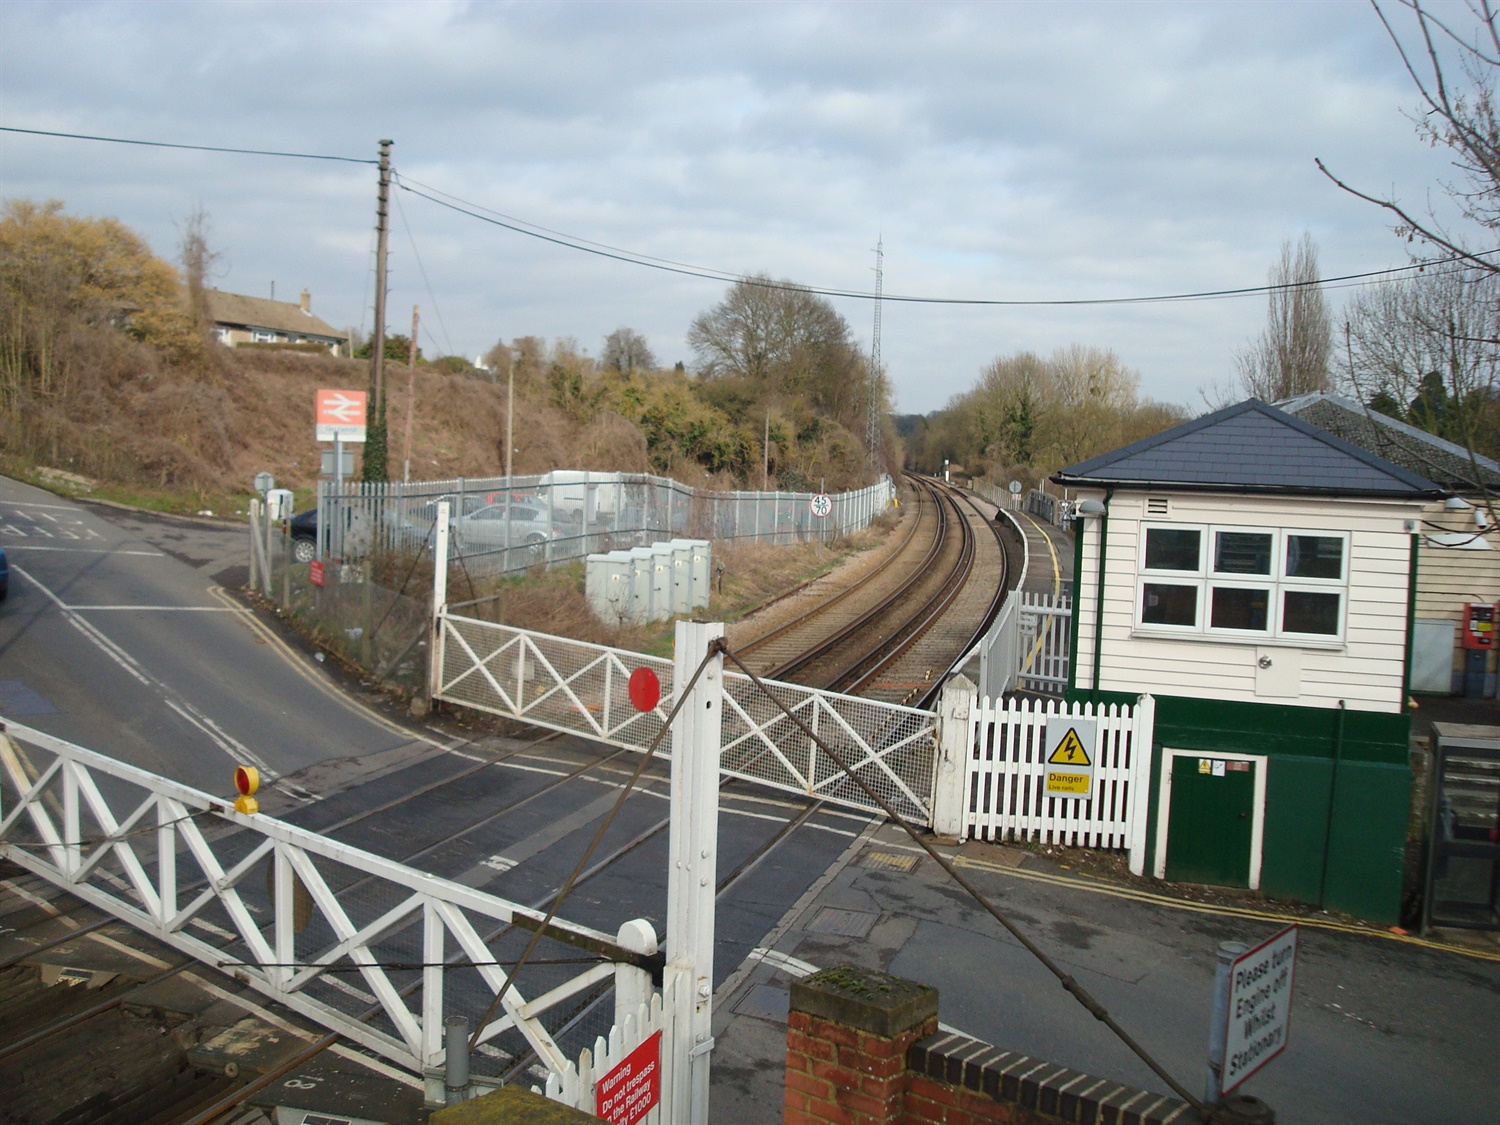 Network Rail fined £200k after elderly signaller suffers ‘life-changing injuries’ in level crossing